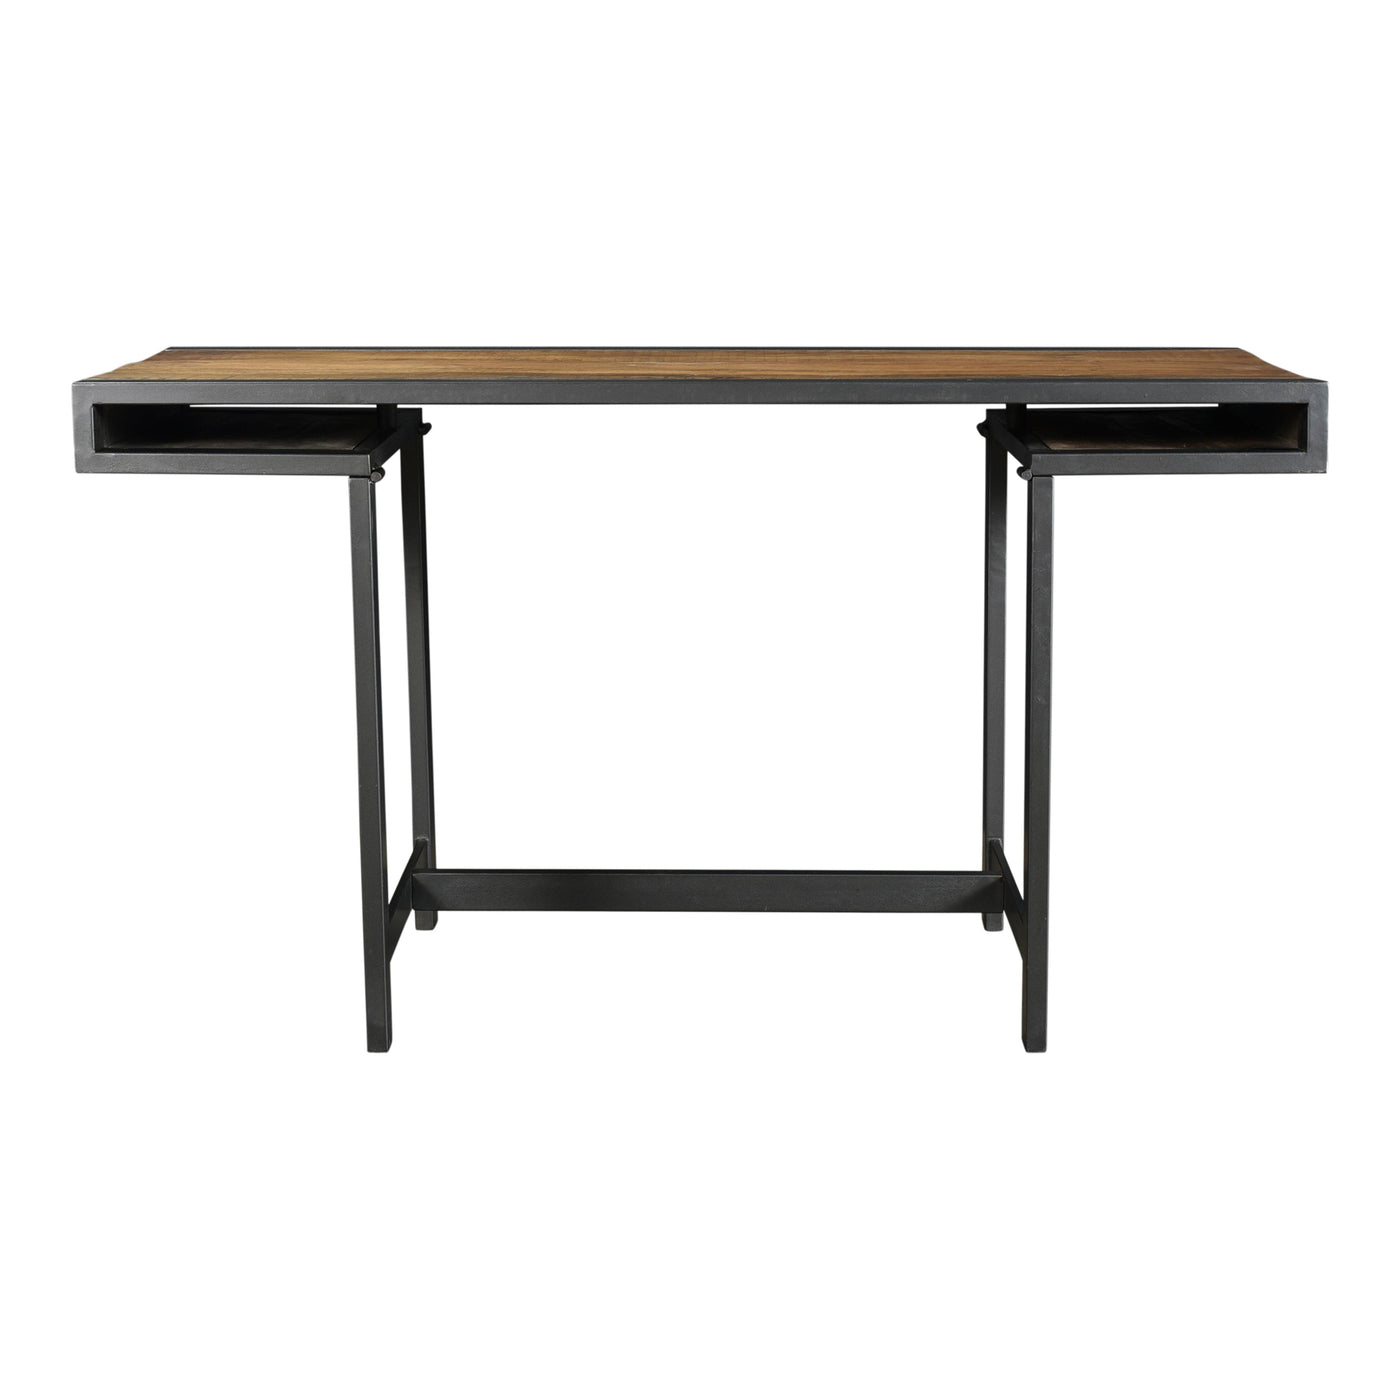 Entrenched in industrial design, the Parliament Desk's solid mango wood tabletop and iron detailing, illustrate the modern...